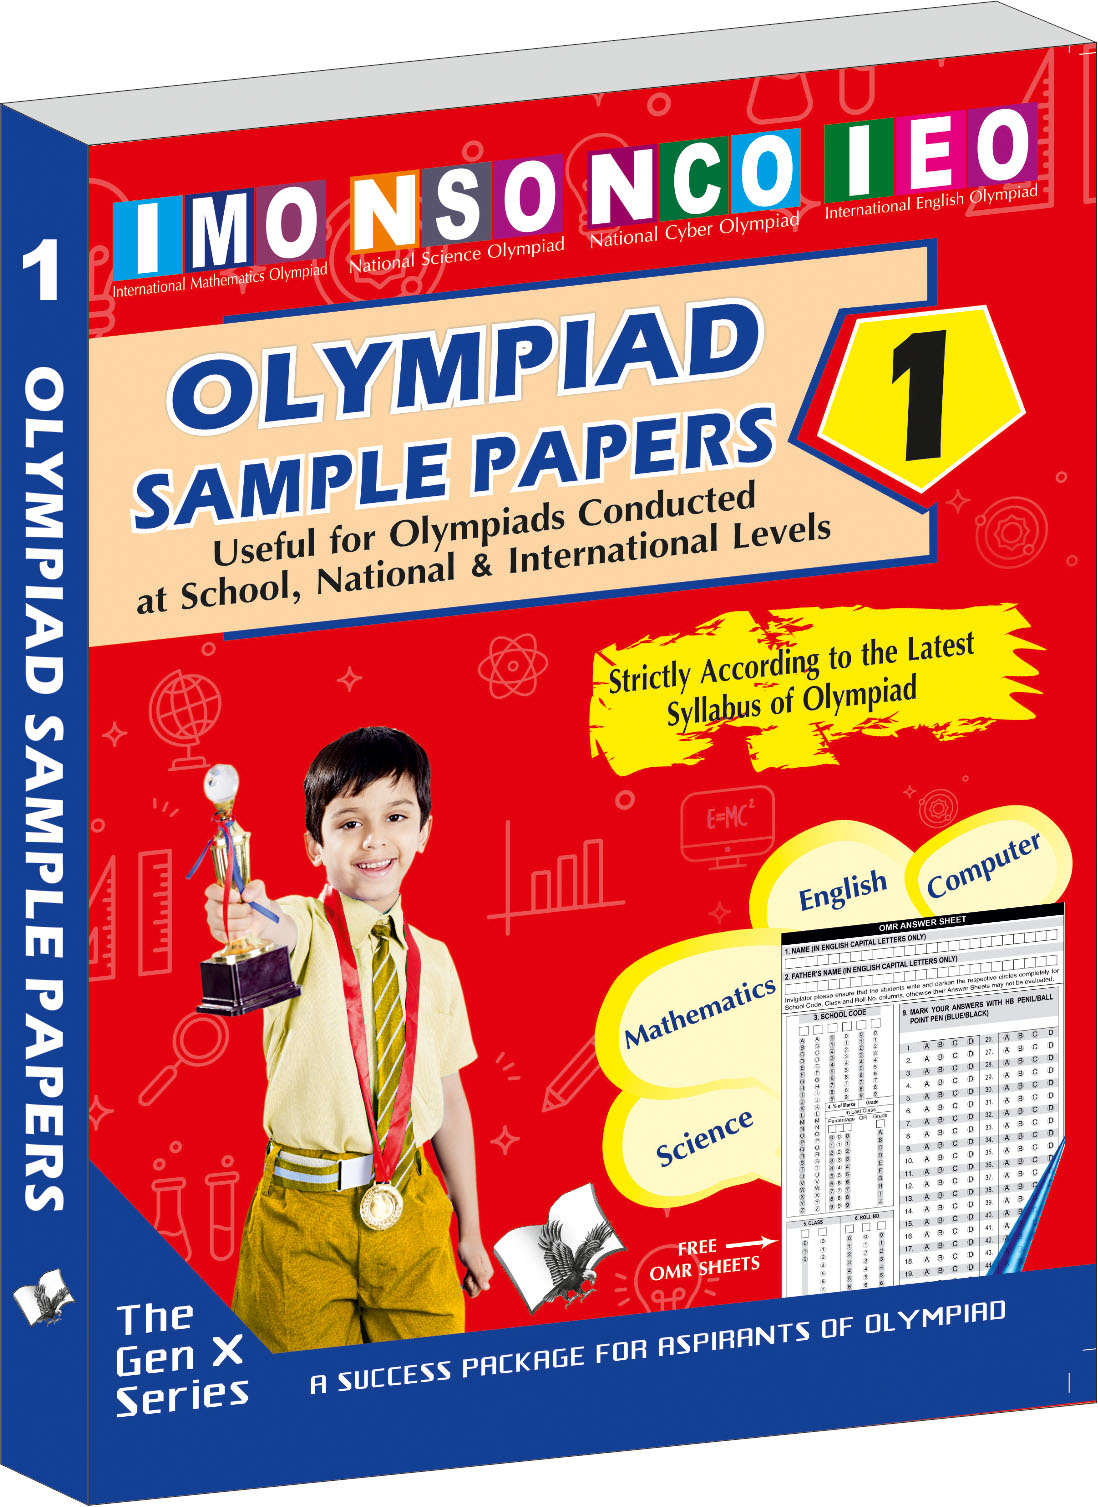 Olympiad Sample Paper 1-Useful for Olympiad conducted at School, National & International levels